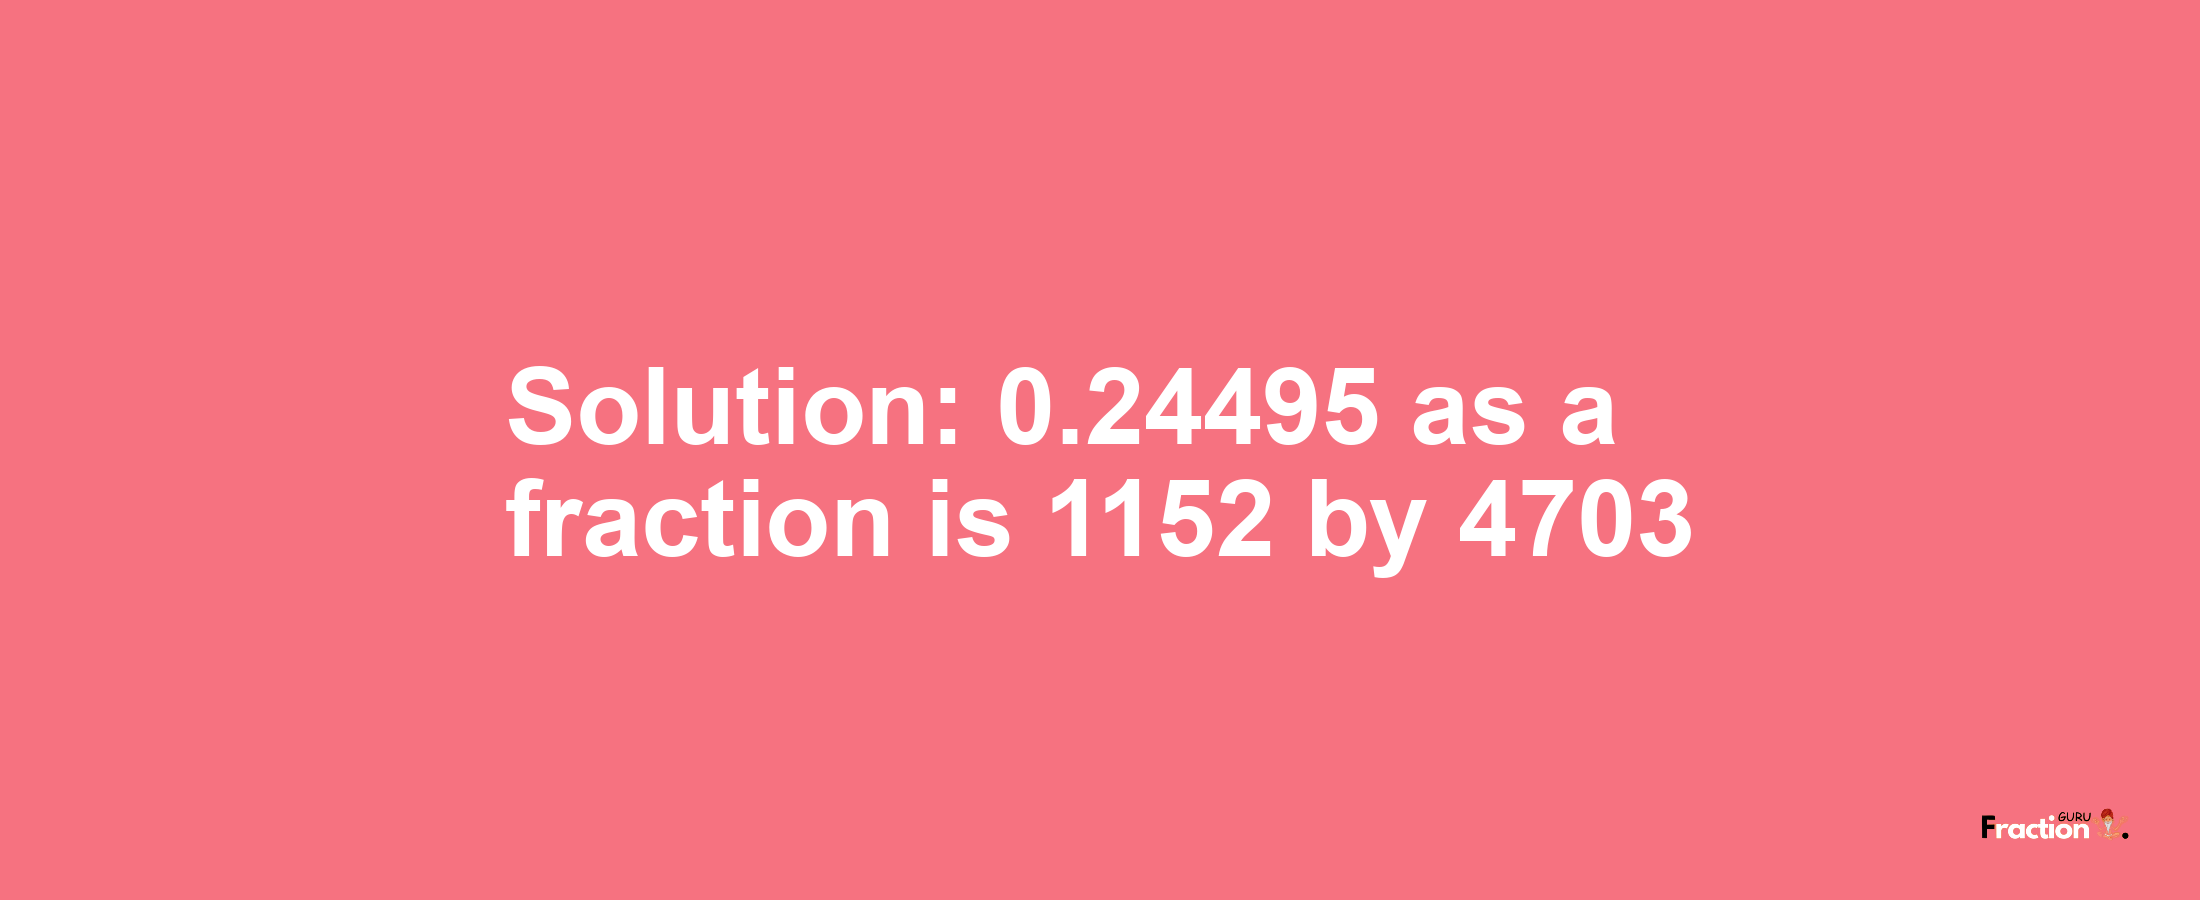 Solution:0.24495 as a fraction is 1152/4703